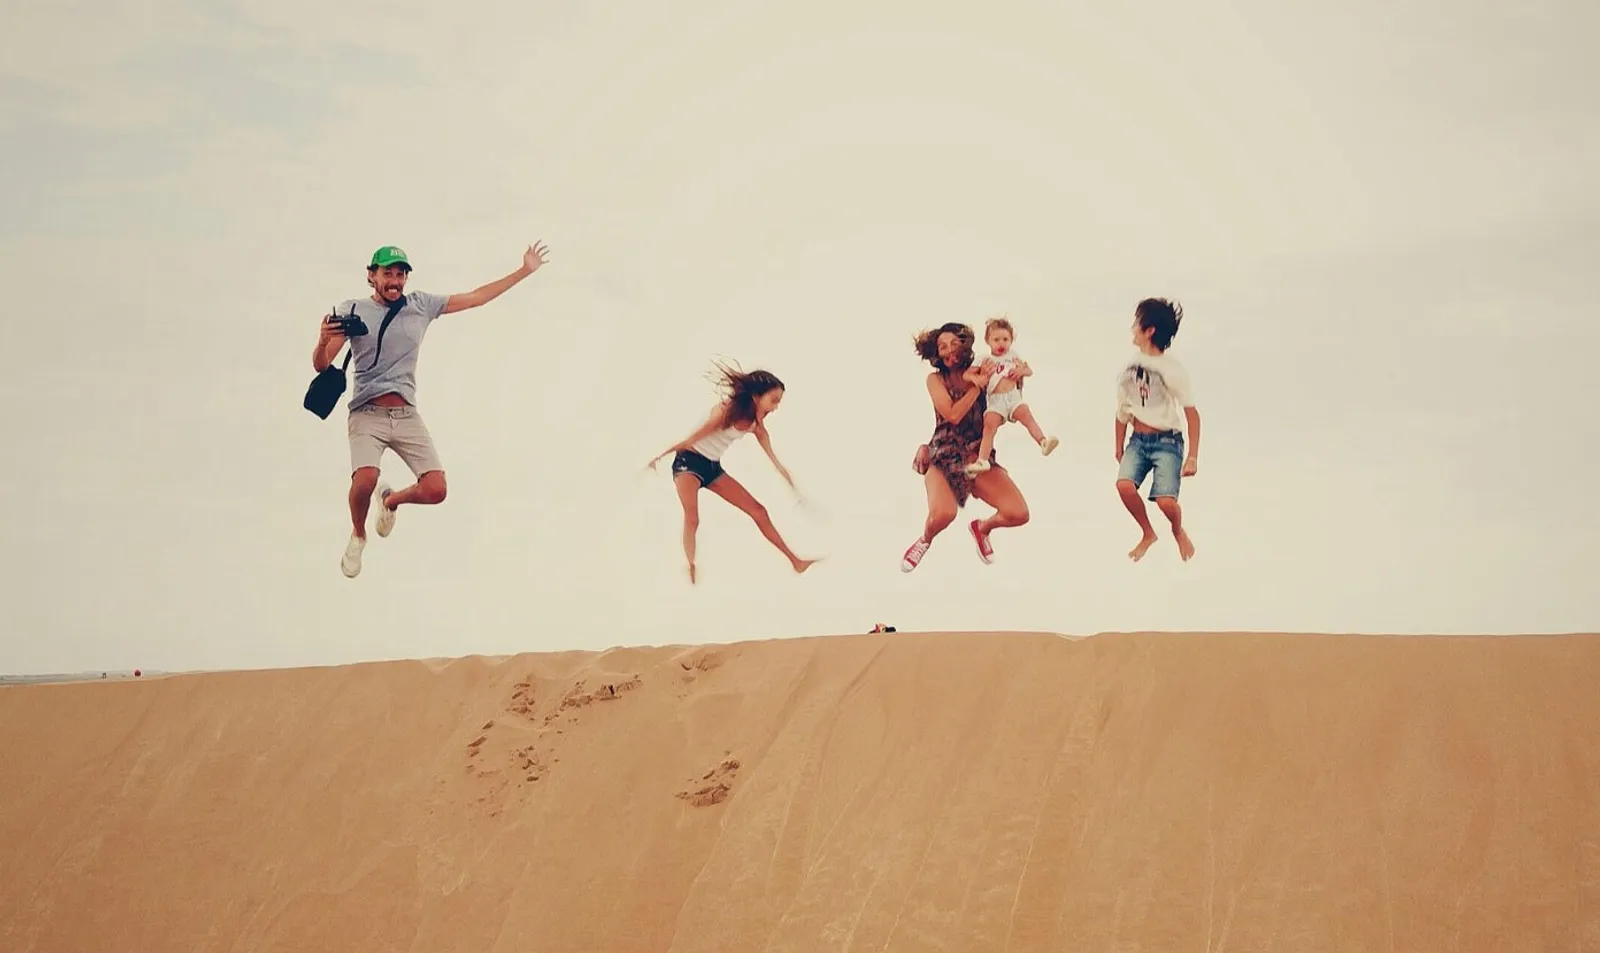 family jump with jumps in the sand dune